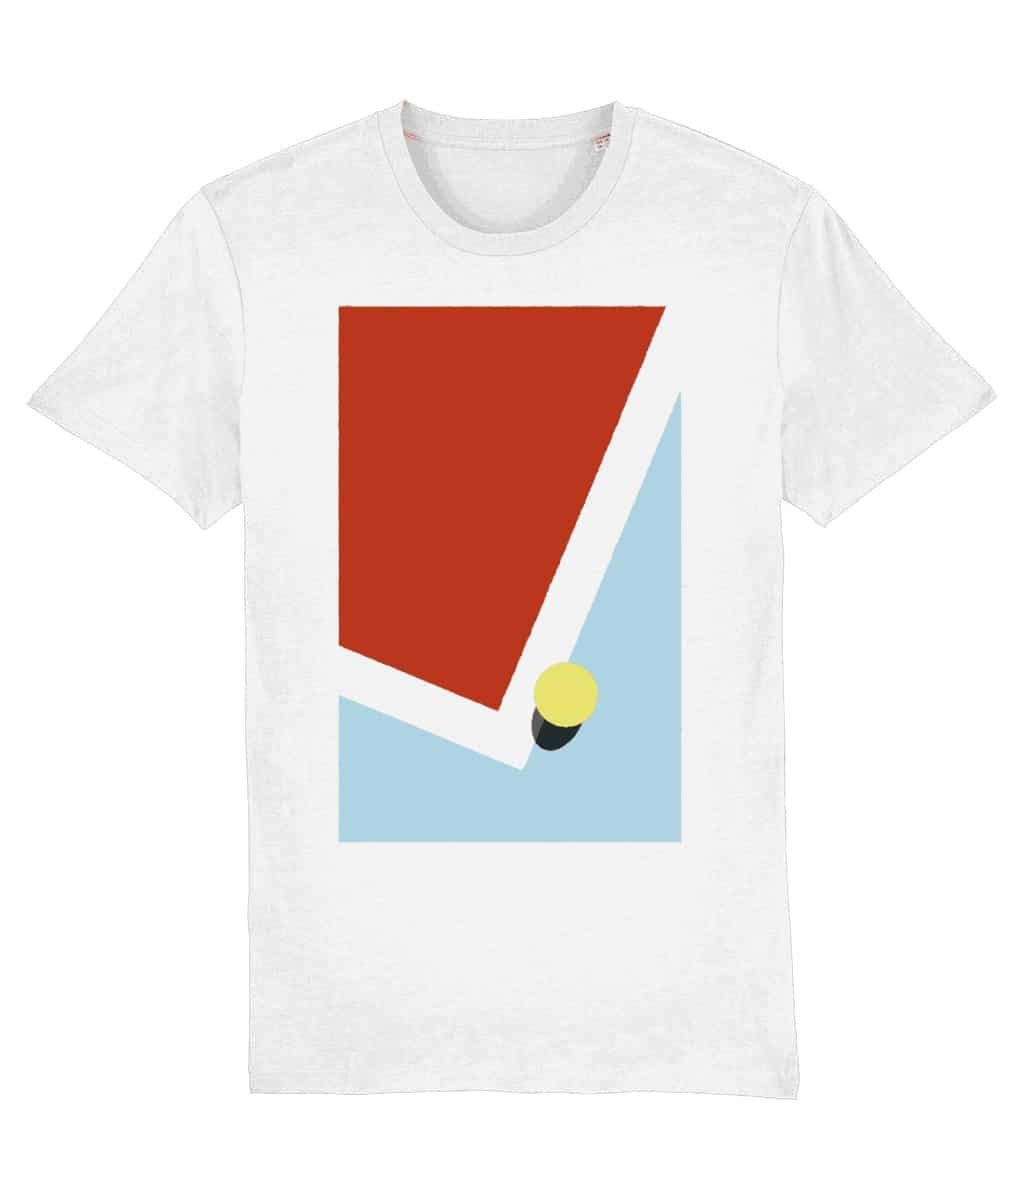 Down The Line Tennis Shot White T-shirt | ON THE TOP | Tennis Inspired ...